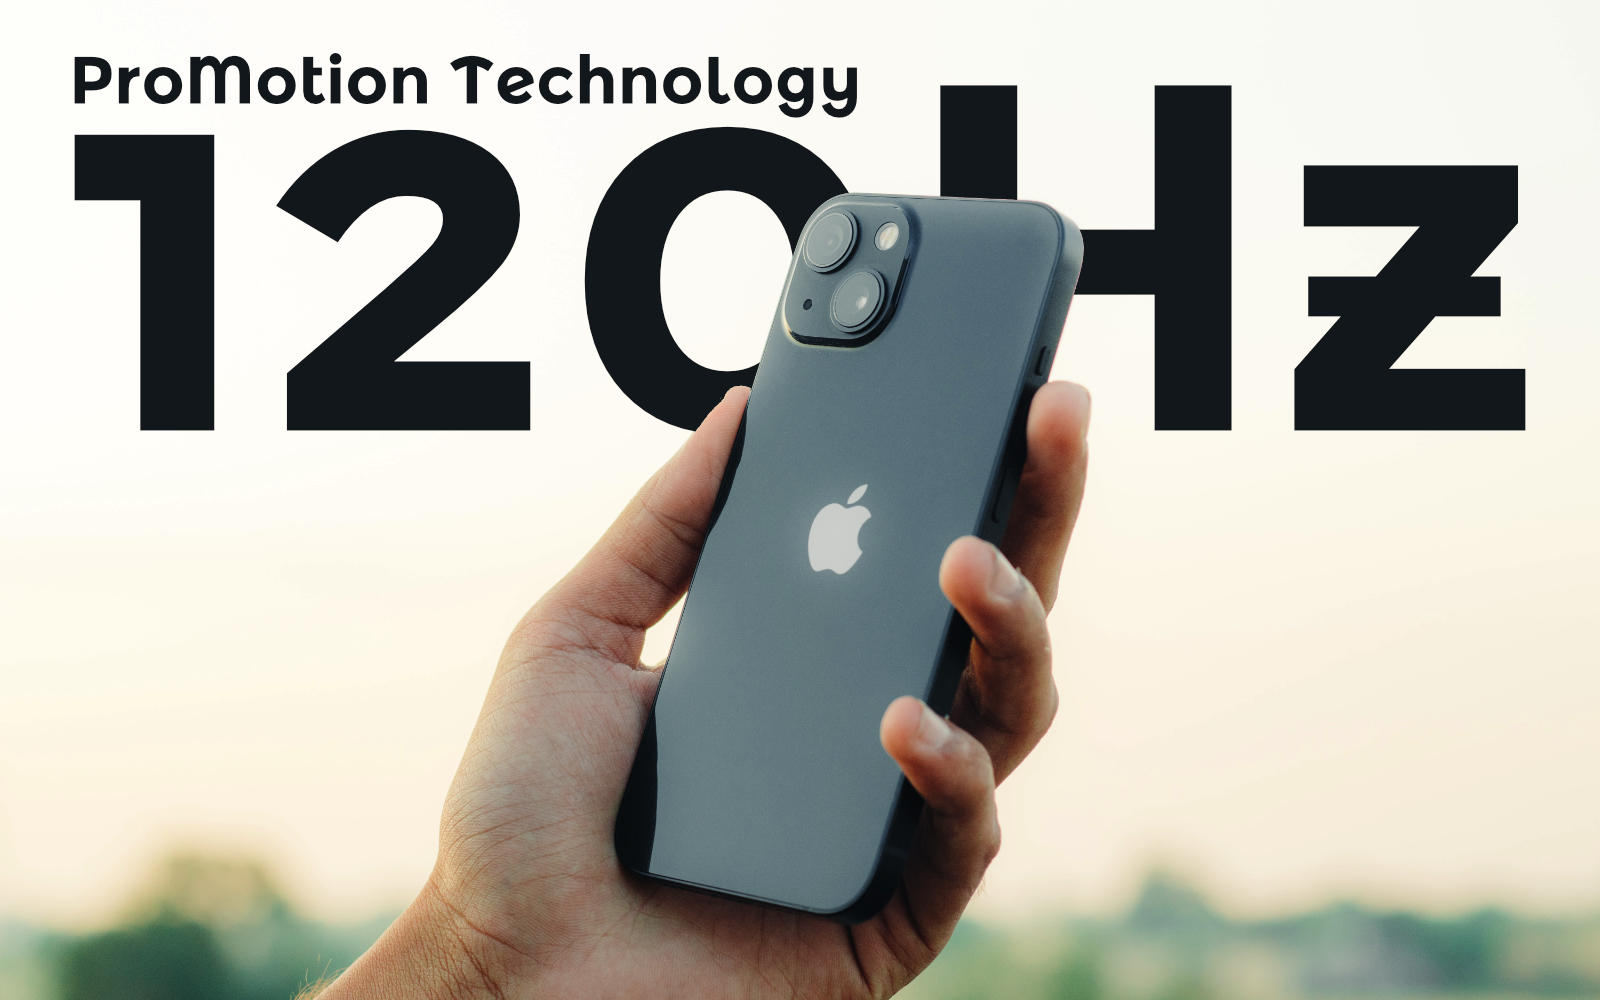 ProMotion Technology for iPhone14 rumor